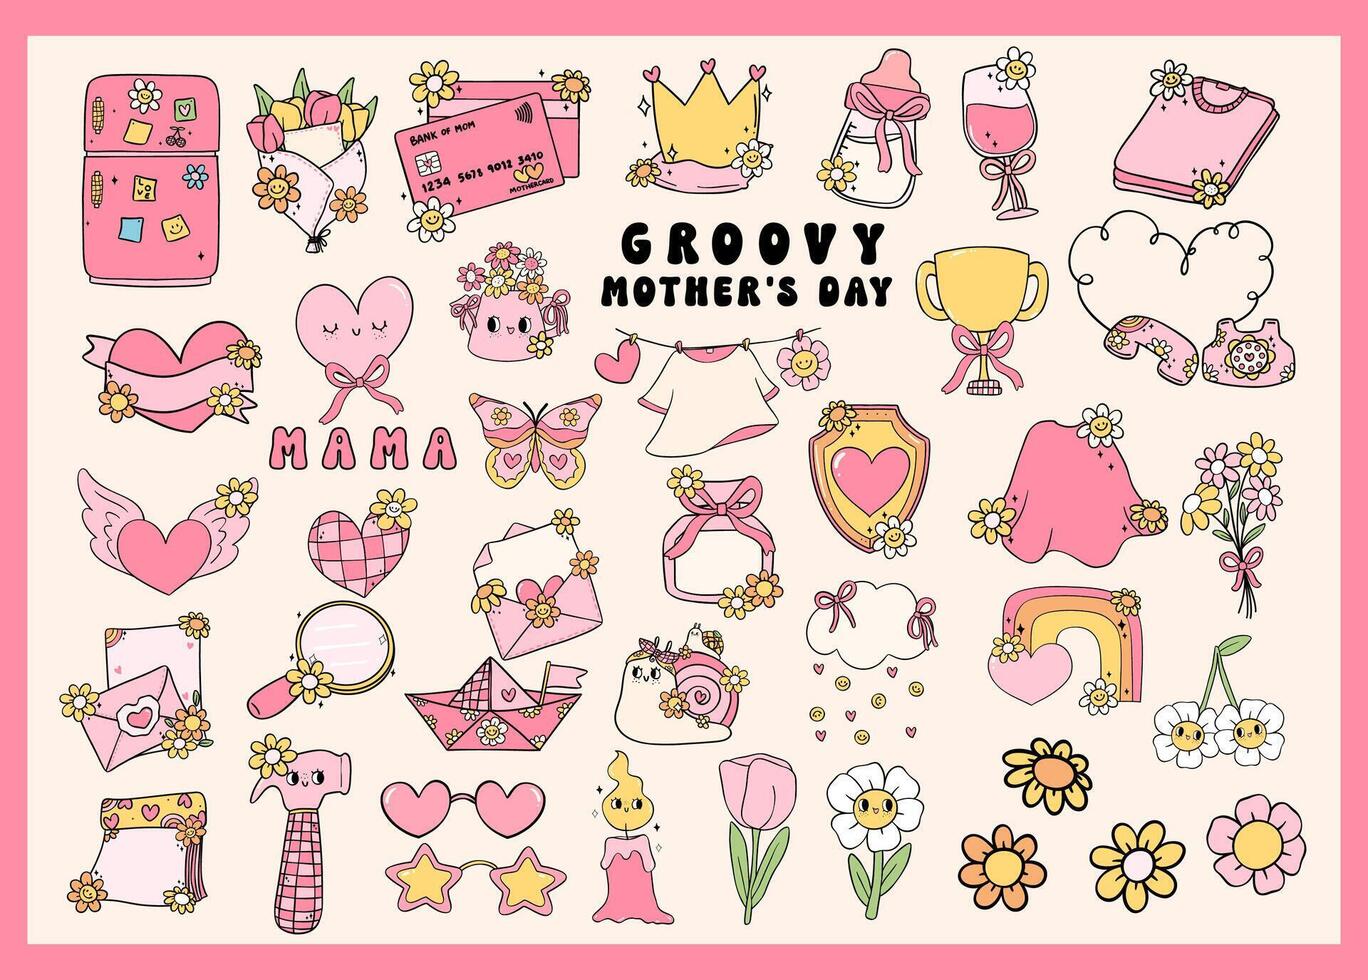 Retro Groovy Mothers Day icon elements Doodle Drawing Vibrant Pastel Color collection vector